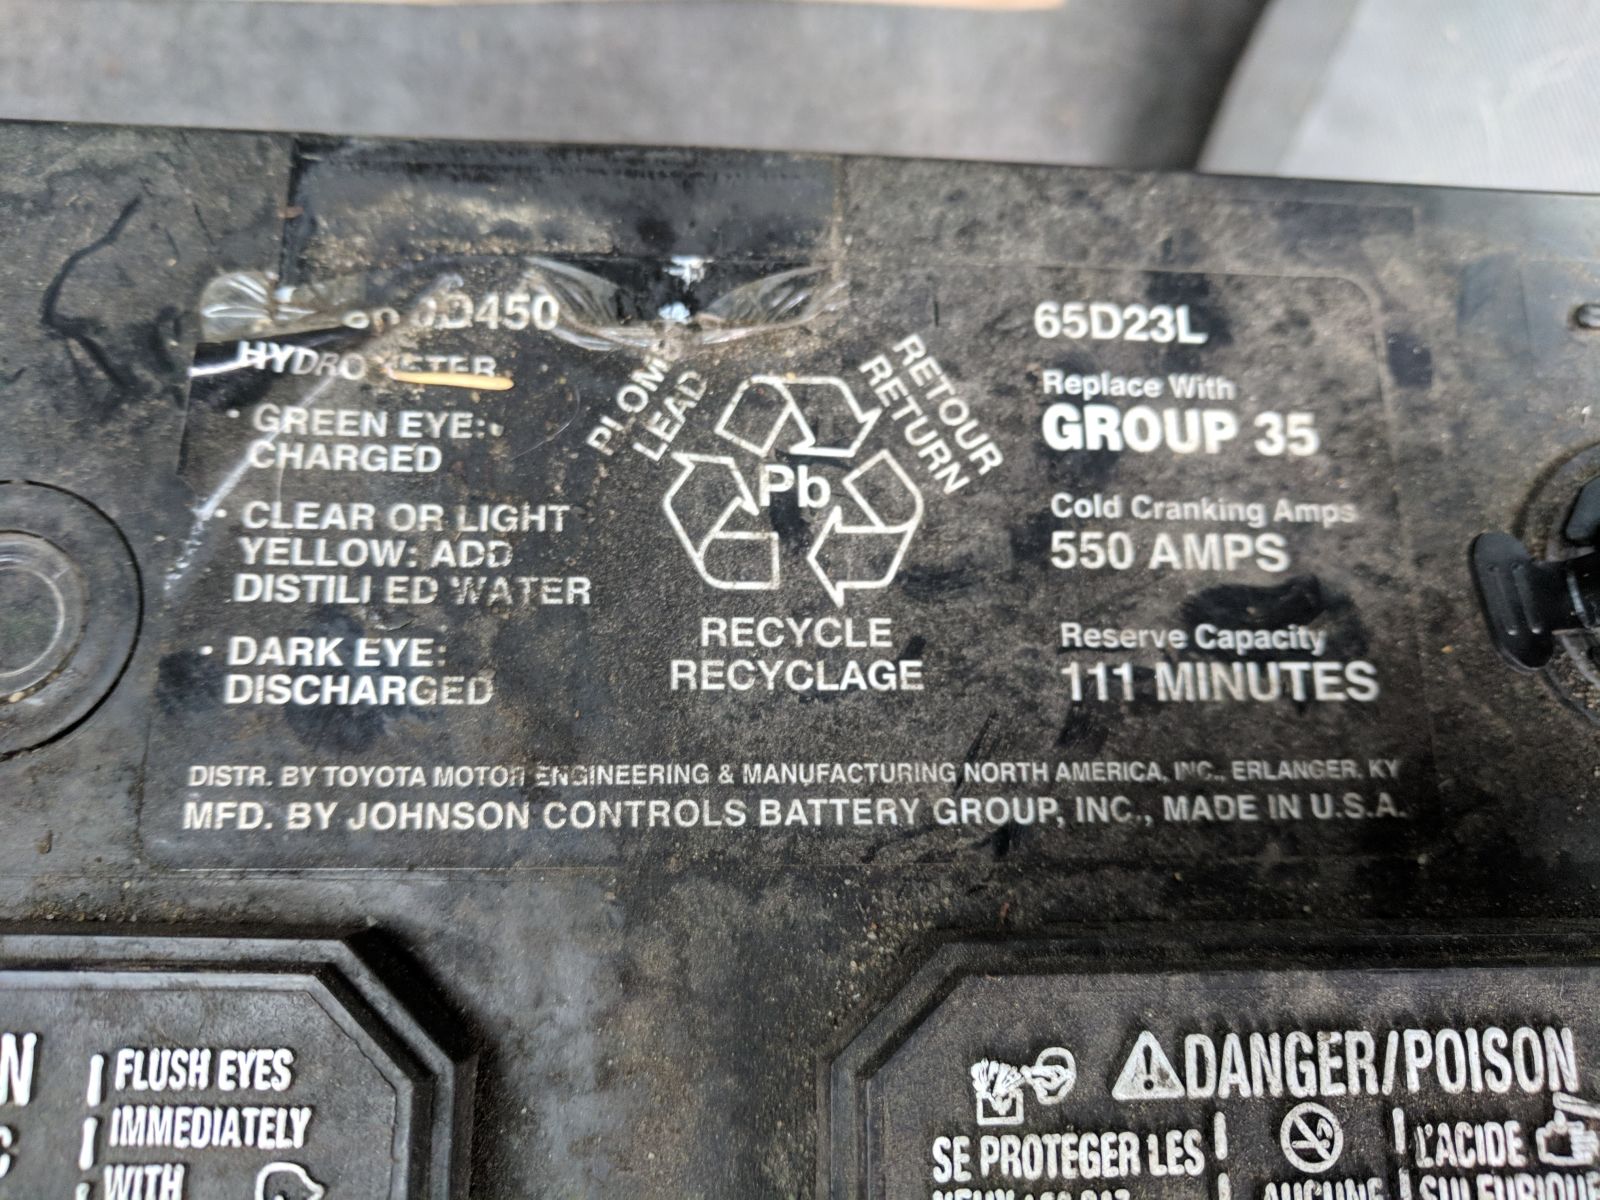 Could this actually be the original battery?!